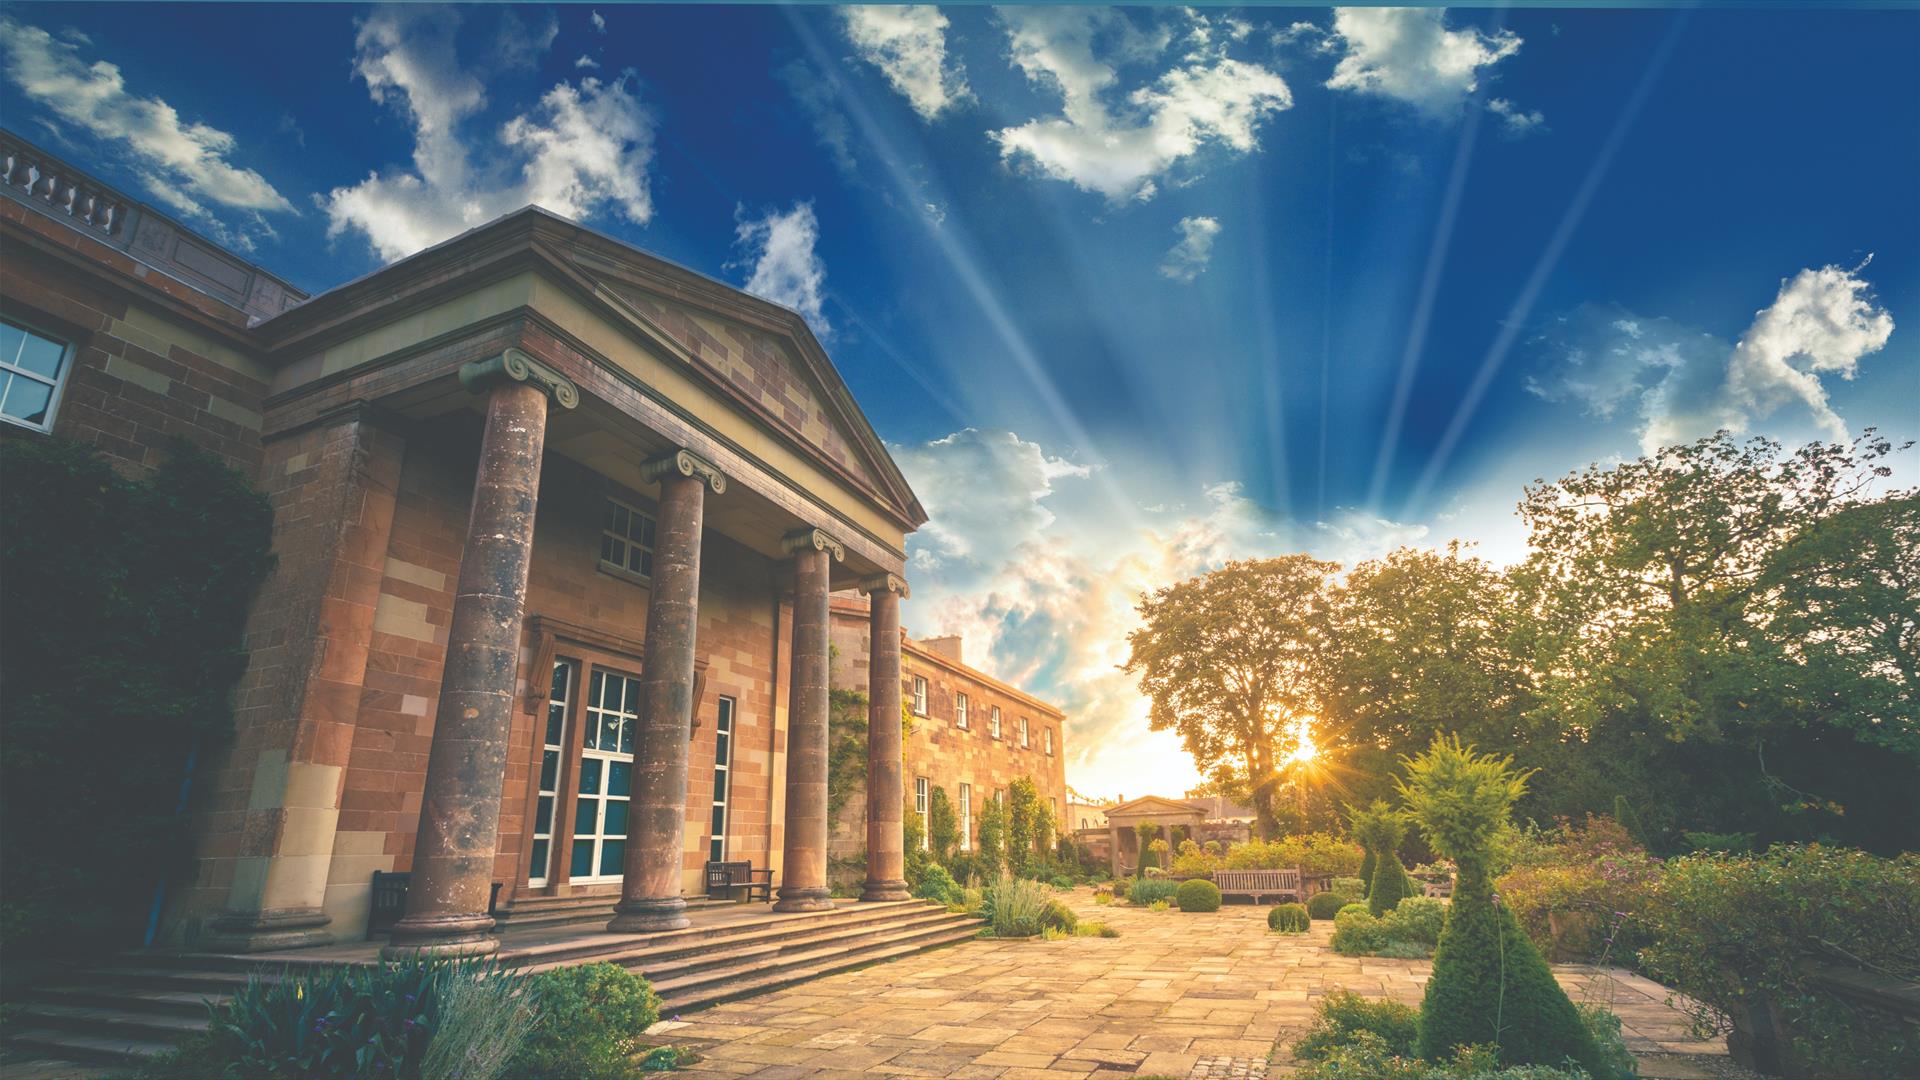 Back view of Hillsborough Castle with sunset